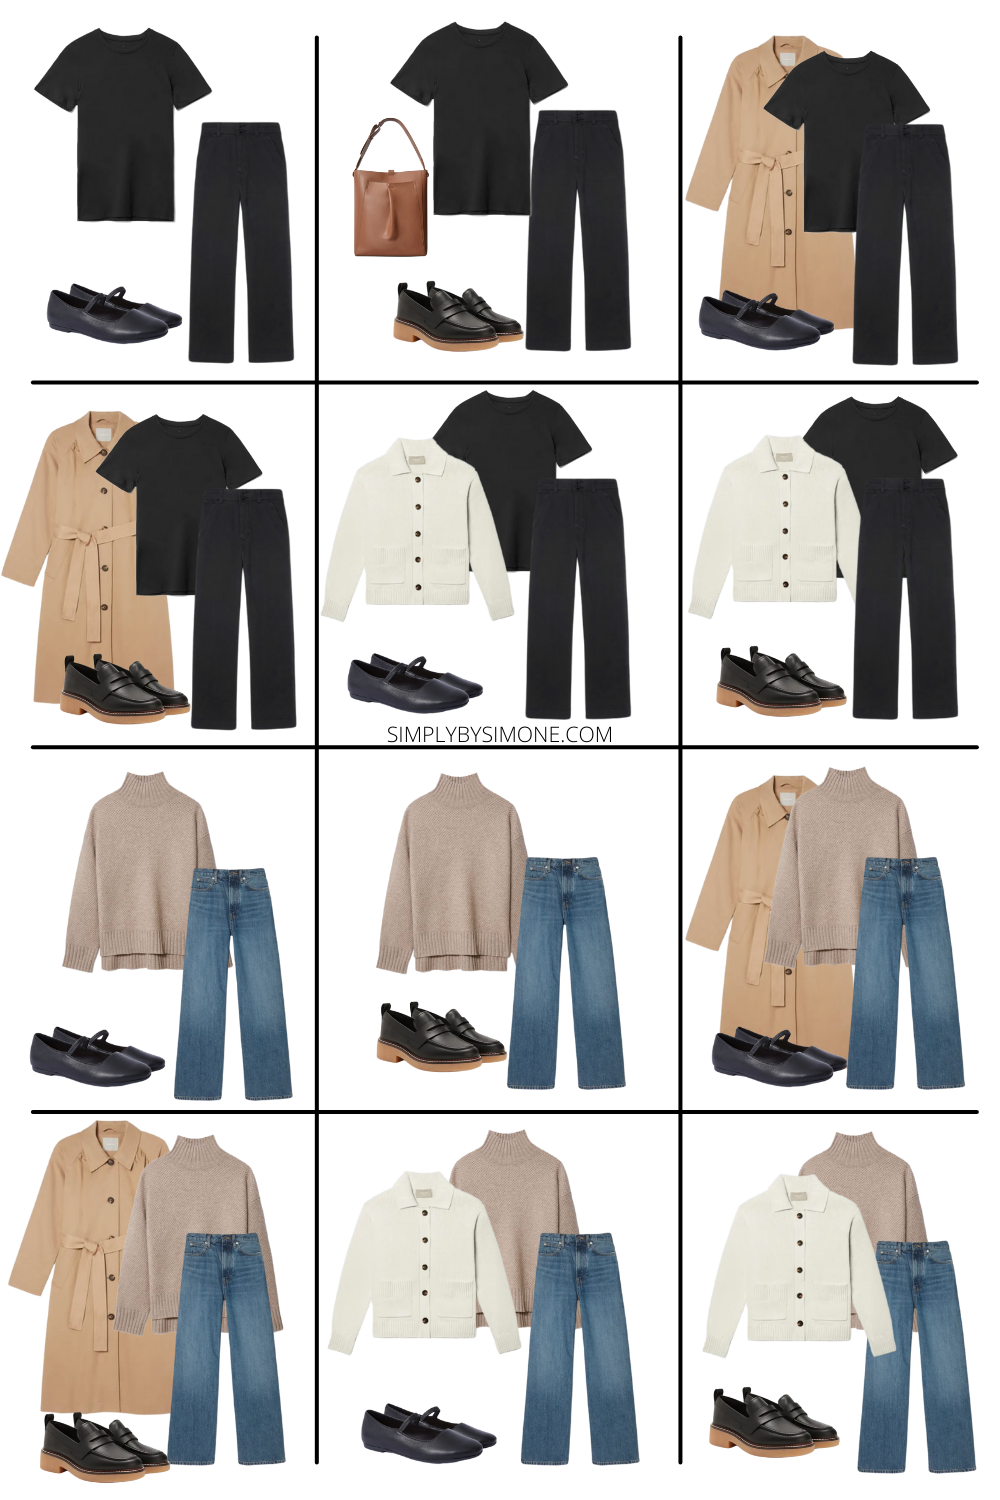 Affordable Everlane Fall Capsule Wardrobe | 10 Pieces, 24 Outfits | How to Build a Capsule Wardrobe | Everlane Fall Clothes | Outfit Inspiration | 24 Fall Weather Outfit Ideas | Fall Vacation Packing Guide | Everlane Fall Capsule Wardrobe | 10 Items to Wear This Fall | Looks 13-24 | Simply by Simone